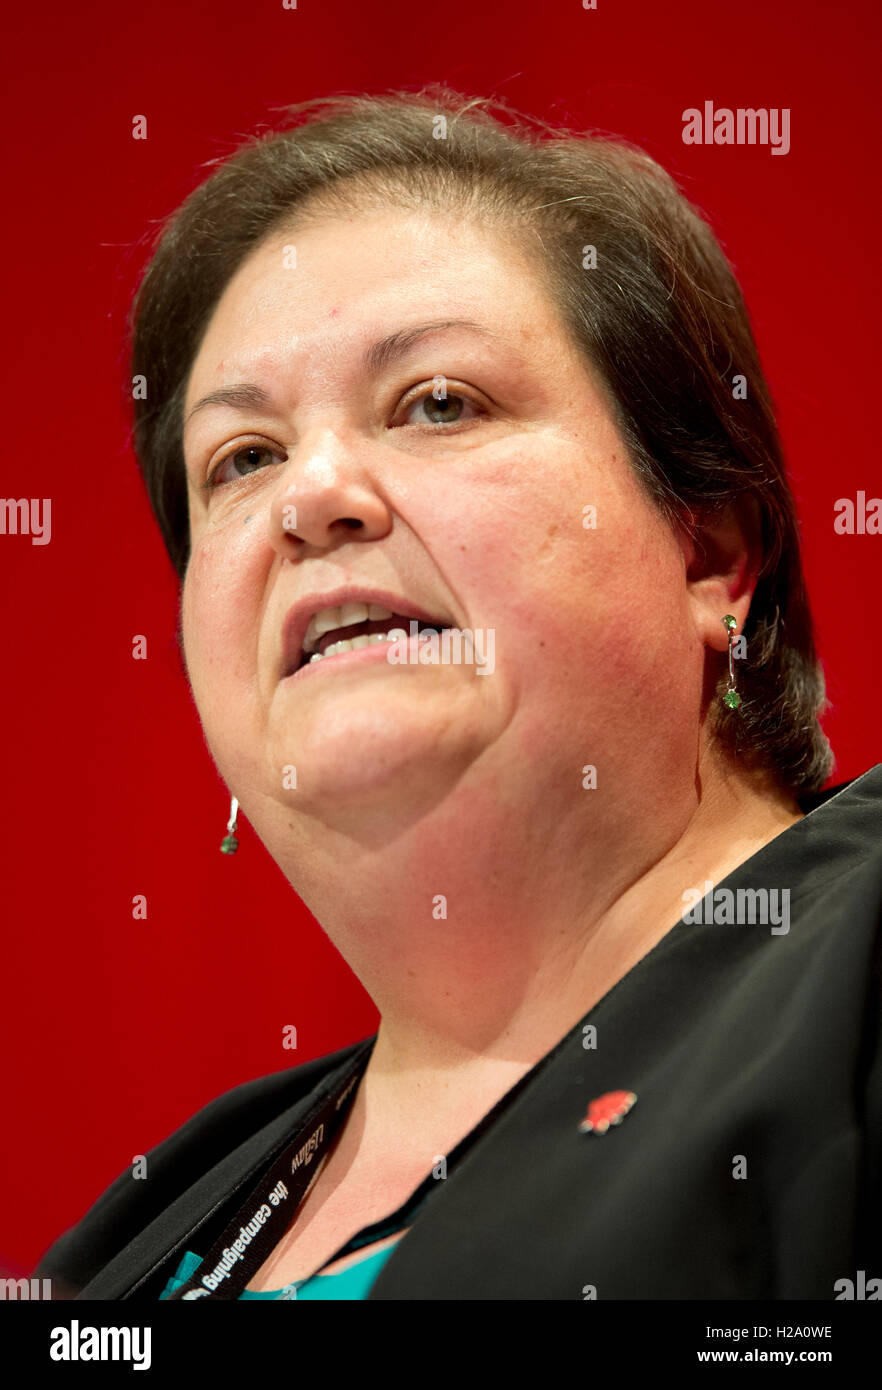 Liverpool, UK. 26th September 2016. West Dumbartonshire MSP Jackie Baillie speaks at day two of the Labour Party Conference in Liverpool. Credit:  Russell Hart/Alamy Live News. Stock Photo